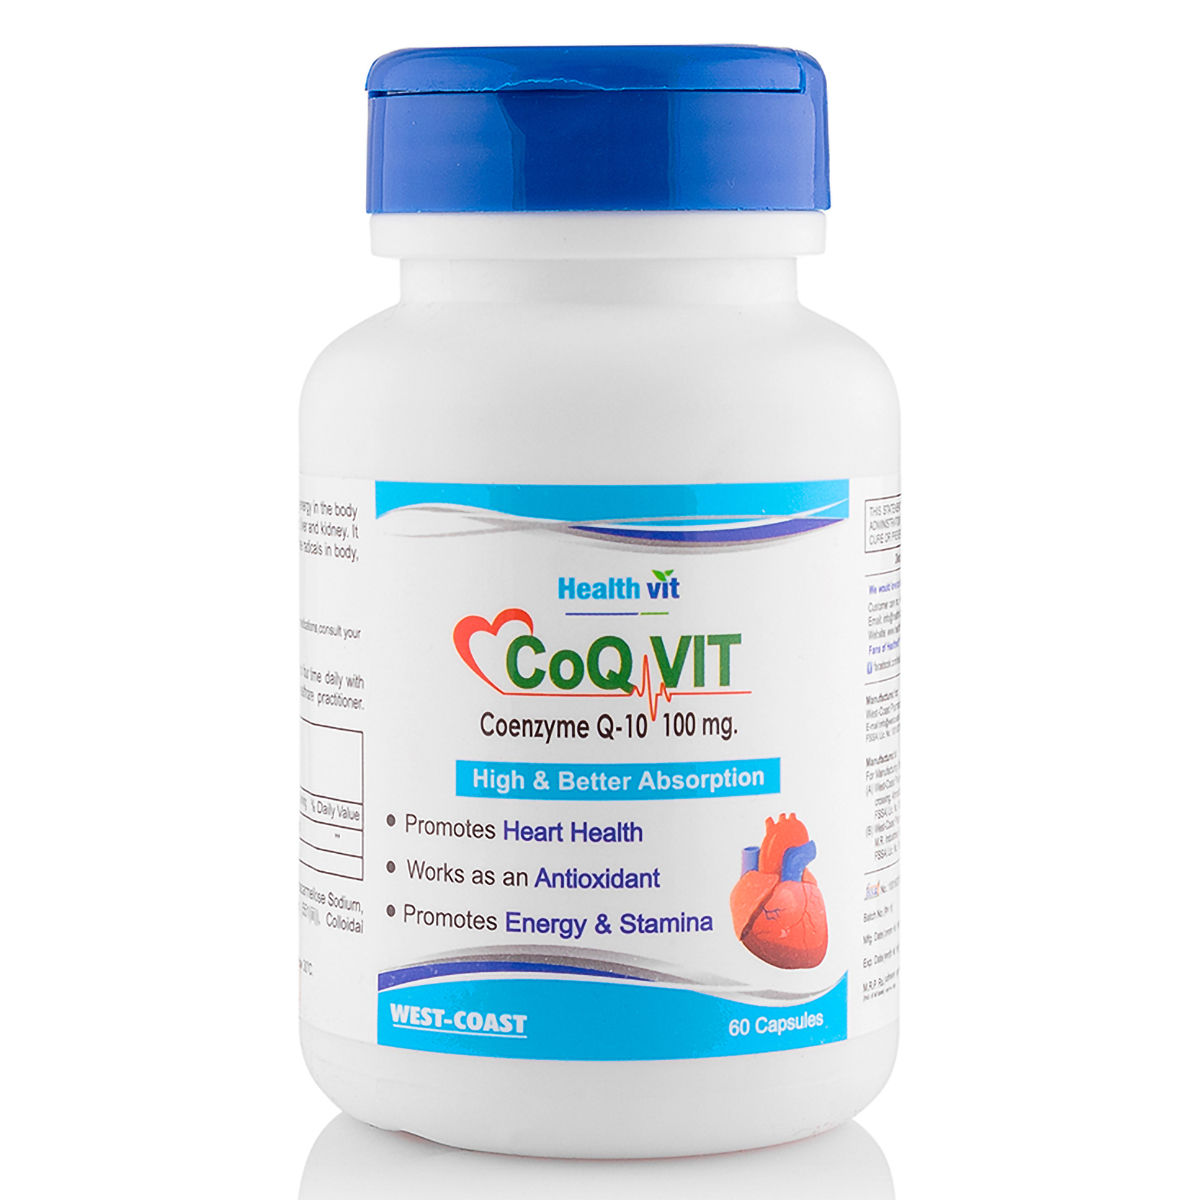 Buy Healthvit High & Better Absorption Co-Qvit Coenzyme Q-10 100 mg, 60 Capsules Online